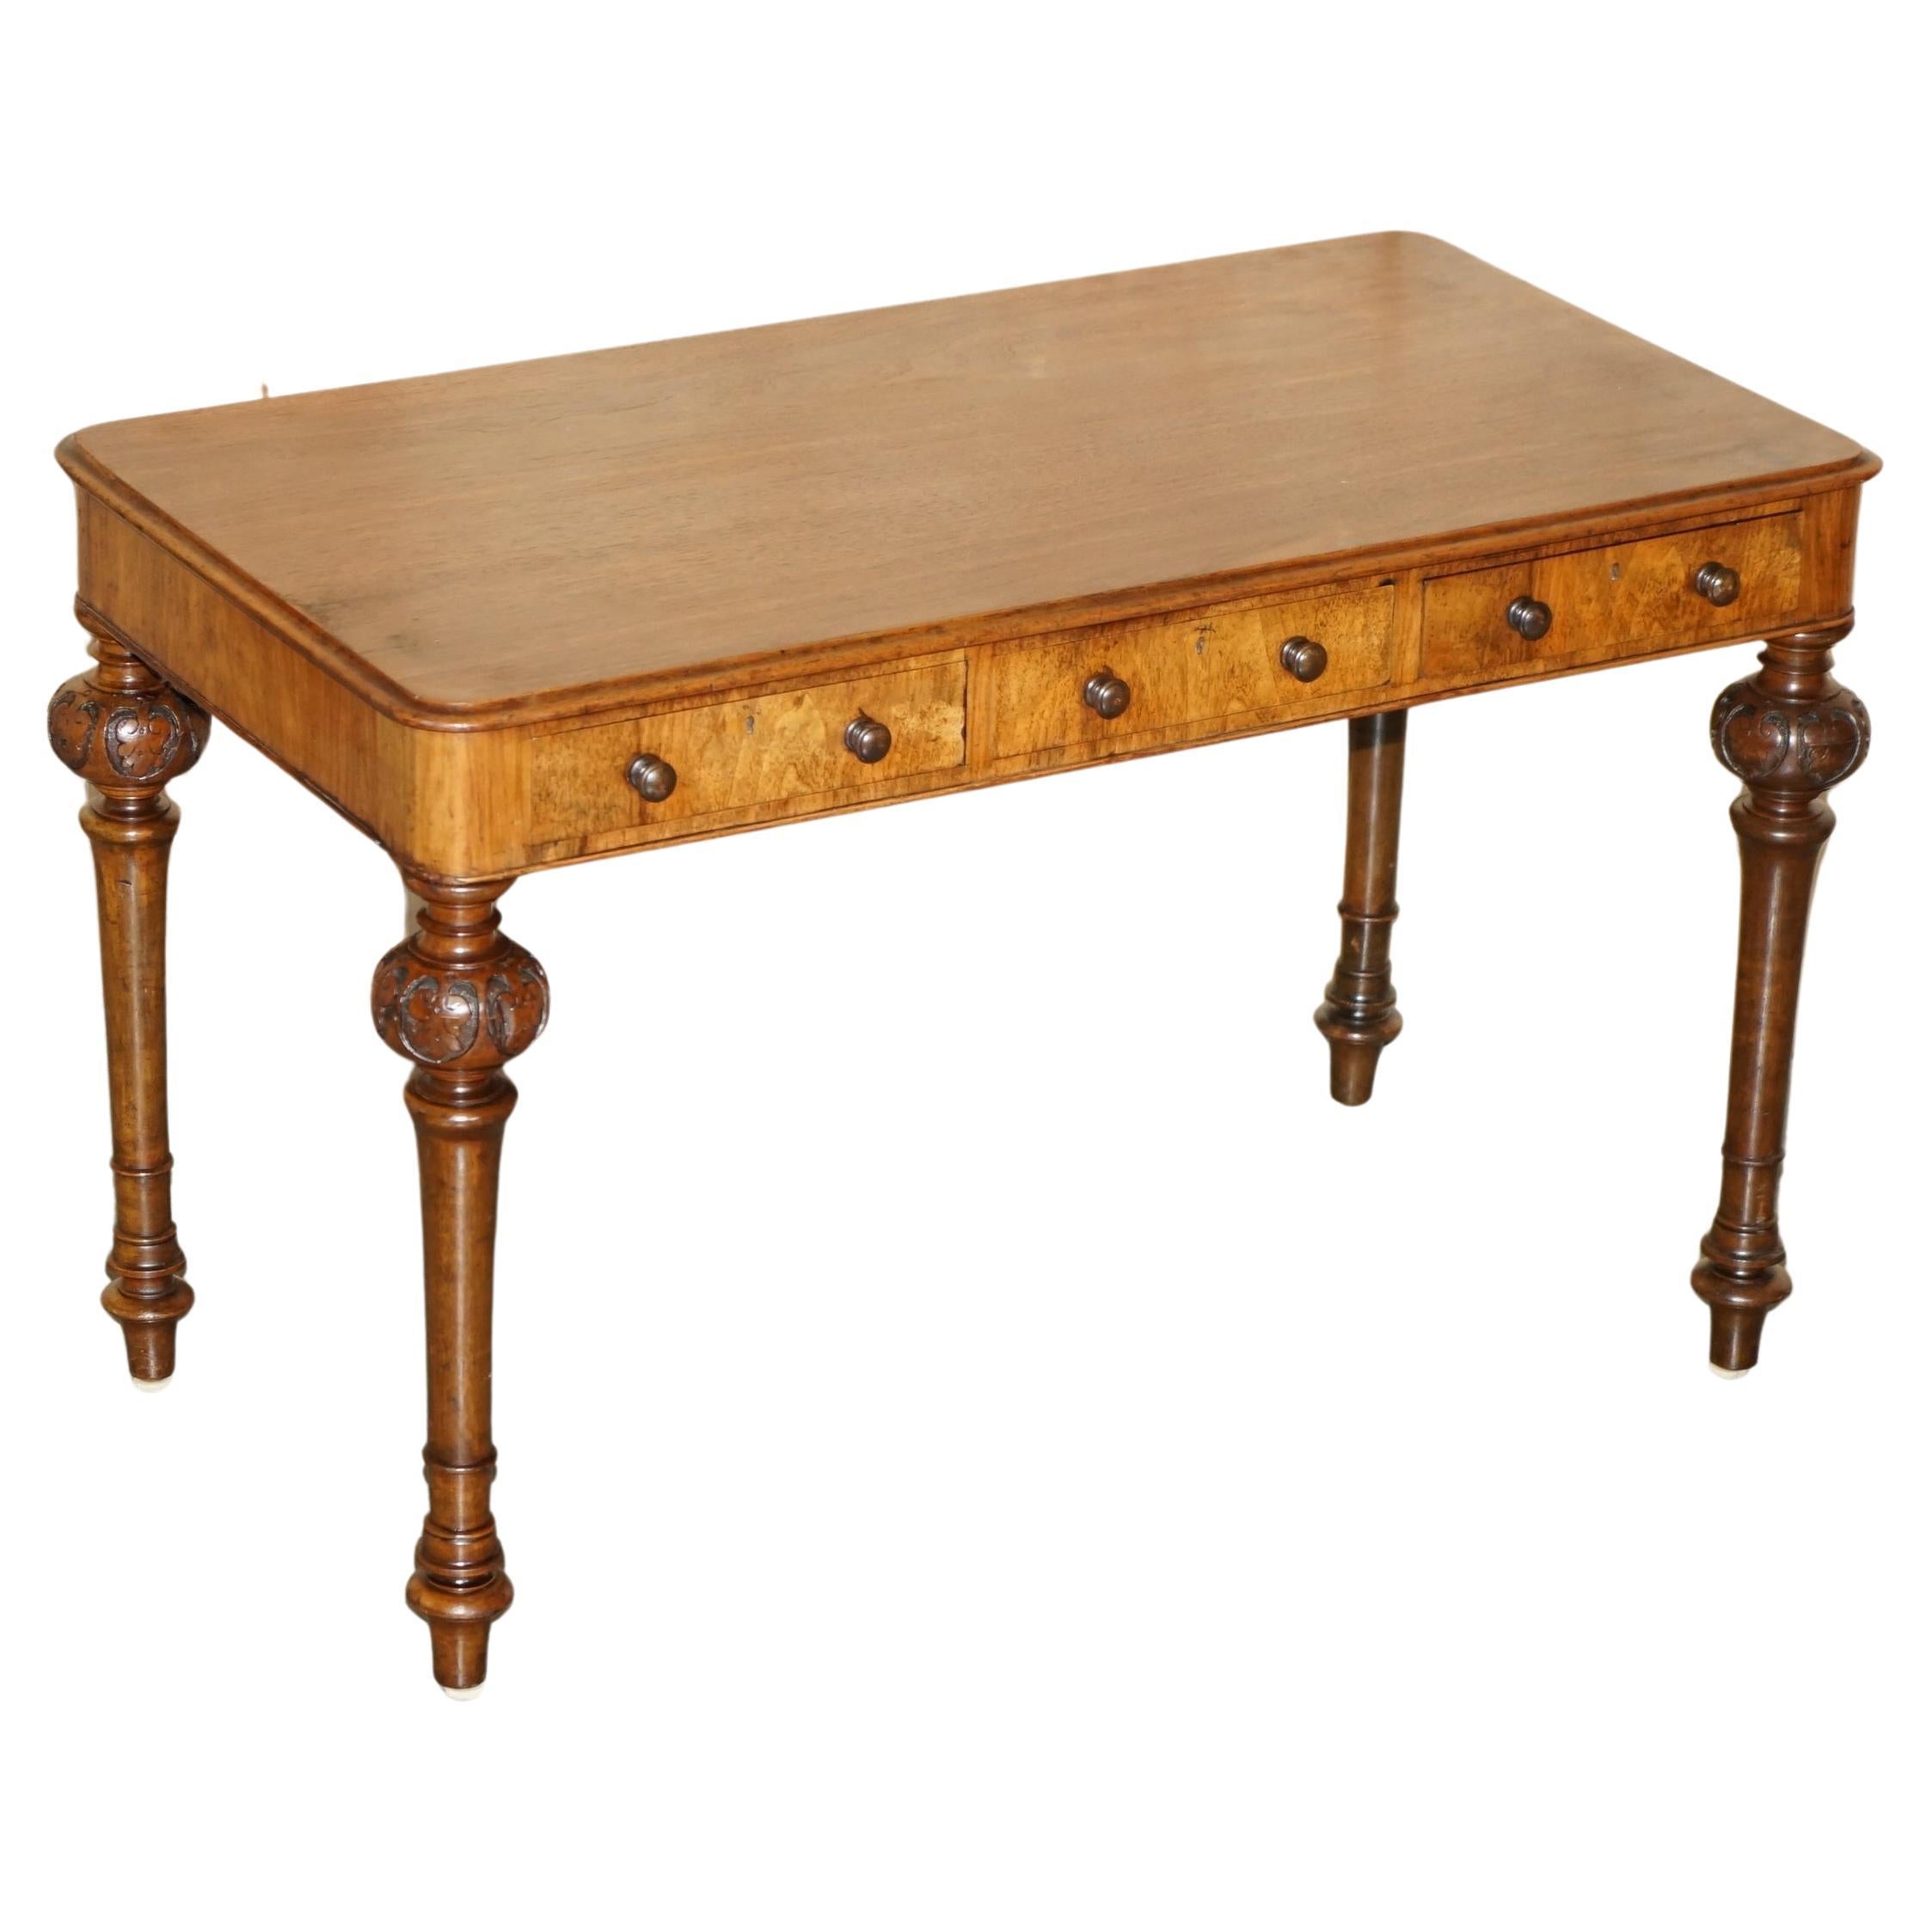 EXQUISITE SMALL WILLIAM IV CIRCA 1830 HARDWOOD WRiTING TABLE DESK CARVED LEGS For Sale